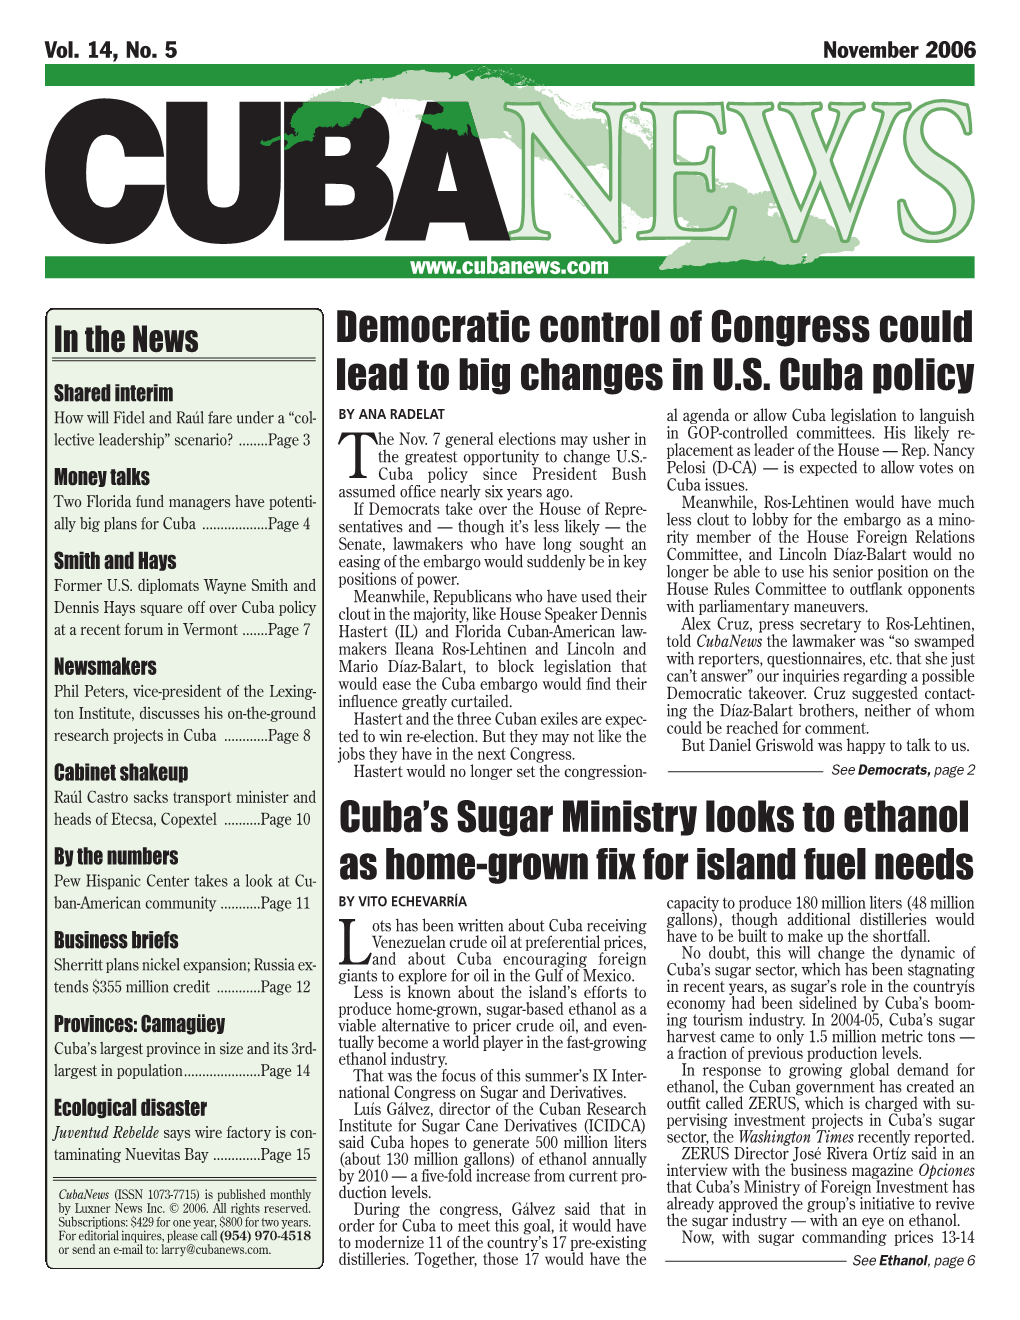 Democratic Control of Congress Could Lead to Big Changes in U.S. Cuba